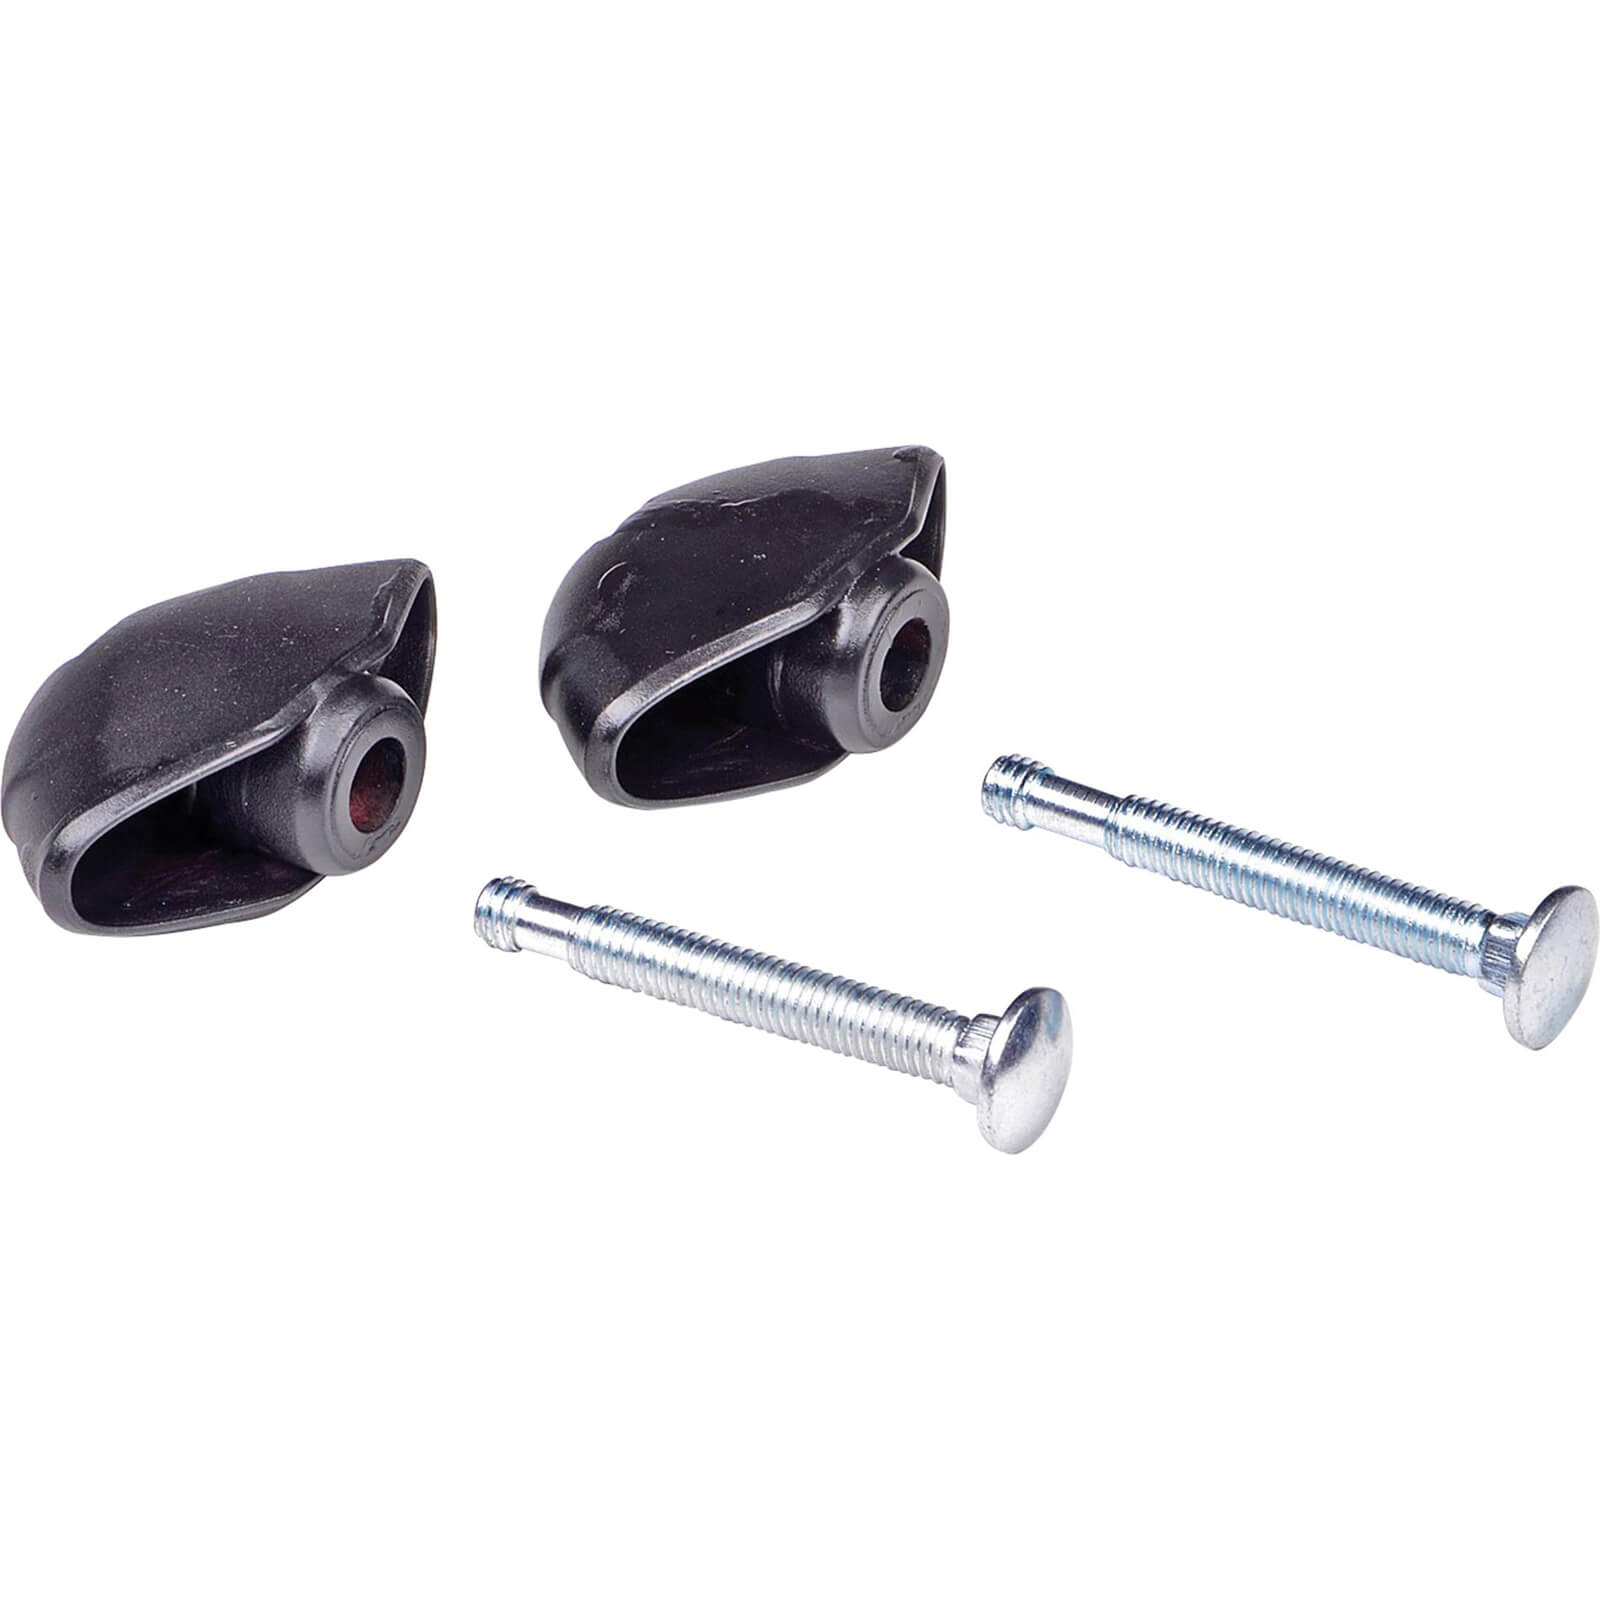 ALM Manufacturing FL198 Handle Fingerwheels & Bolts Fits Many Flymo Hover and Wheeled Lawnmowers